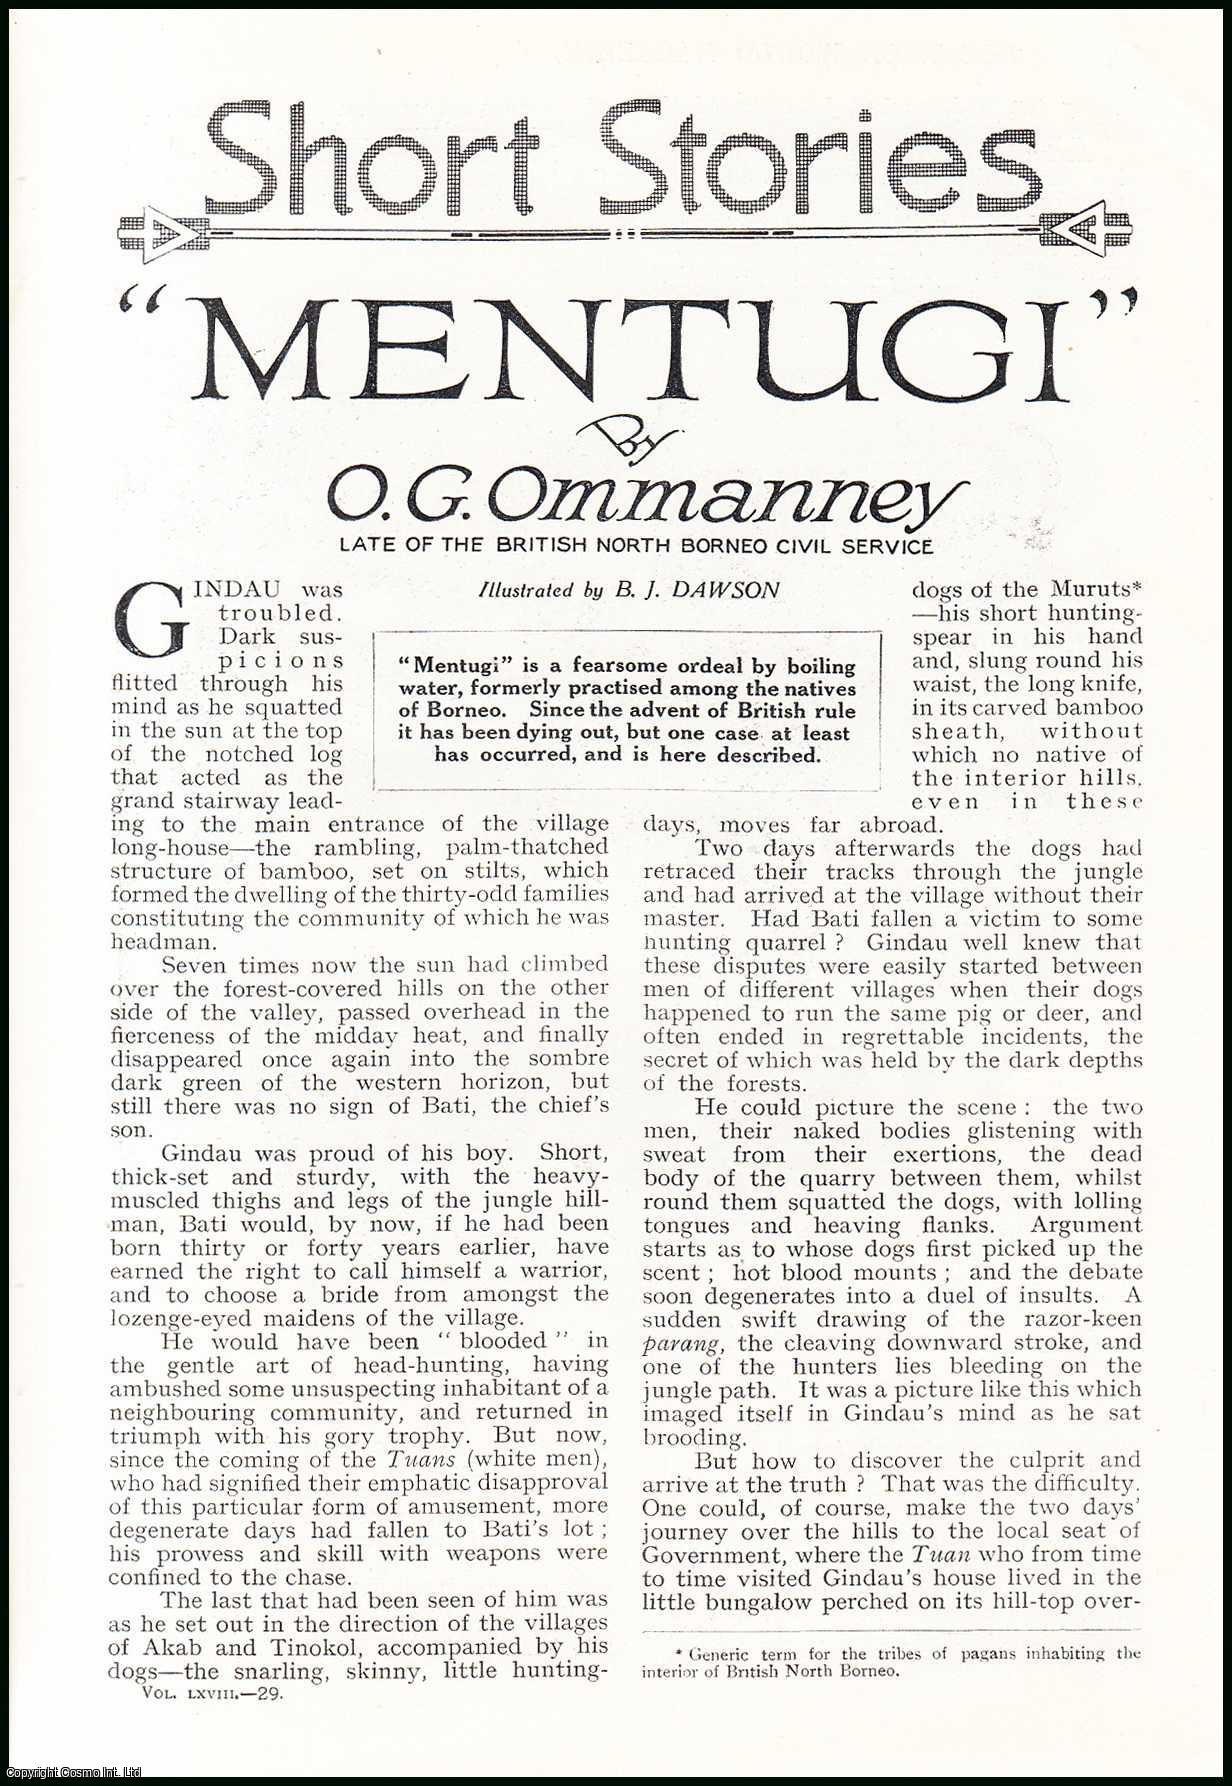 O.G. Ommanney. Late of the British North Borneo Civil Service. Illustrated by B.J. Dawson. - Mentugi : an ordeal by boiling water, formerly practised among the Natives of Borneo. An uncommon original article from the Wide World Magazine, 1932.